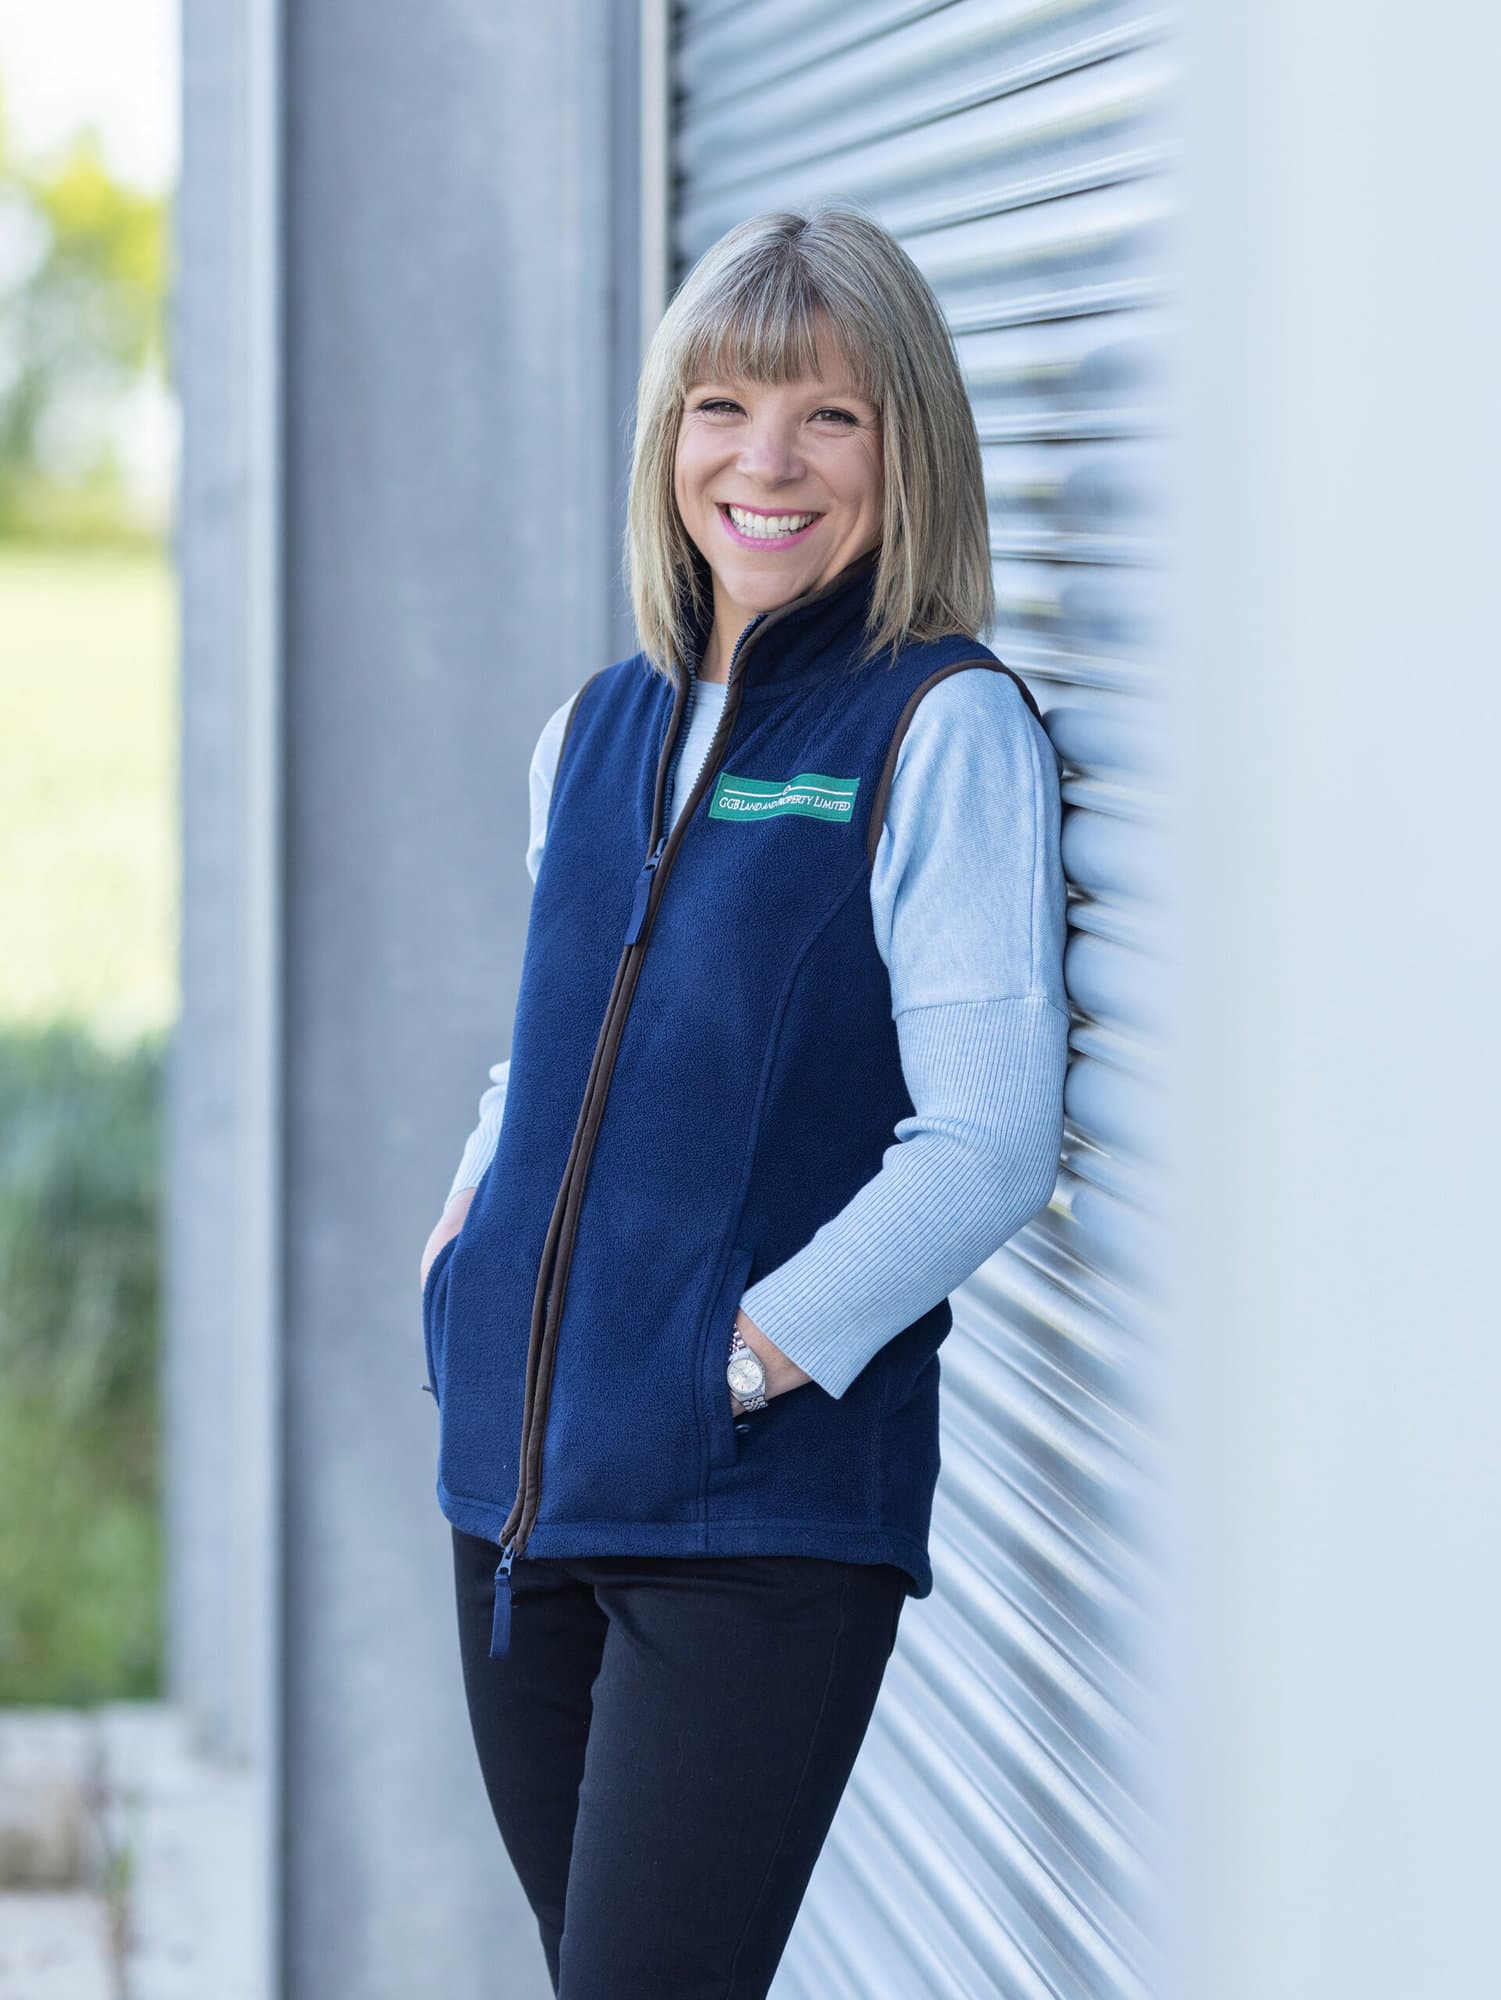 Land agent branding portrait of a woman leaning against a grain store barn door.